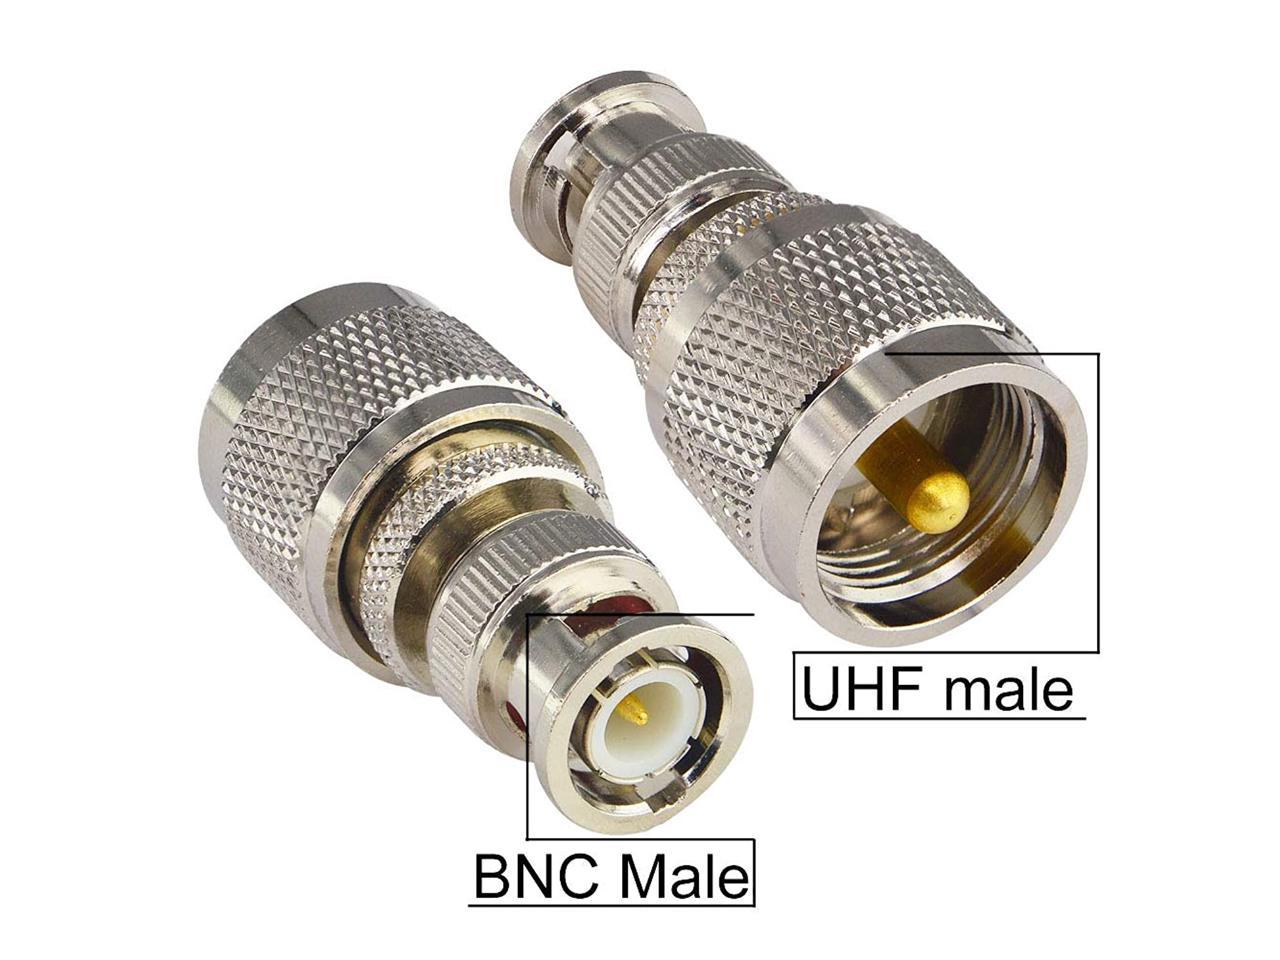 BNC to UHF 4 Type RF Connector Kit Coaxial BNC Male Female to UHF Male Female RF BNC UHF Radios Adapter Kit for Antennas Wireless LAN Devices Coaxial Cable Wi-Fi Radios External Antenna